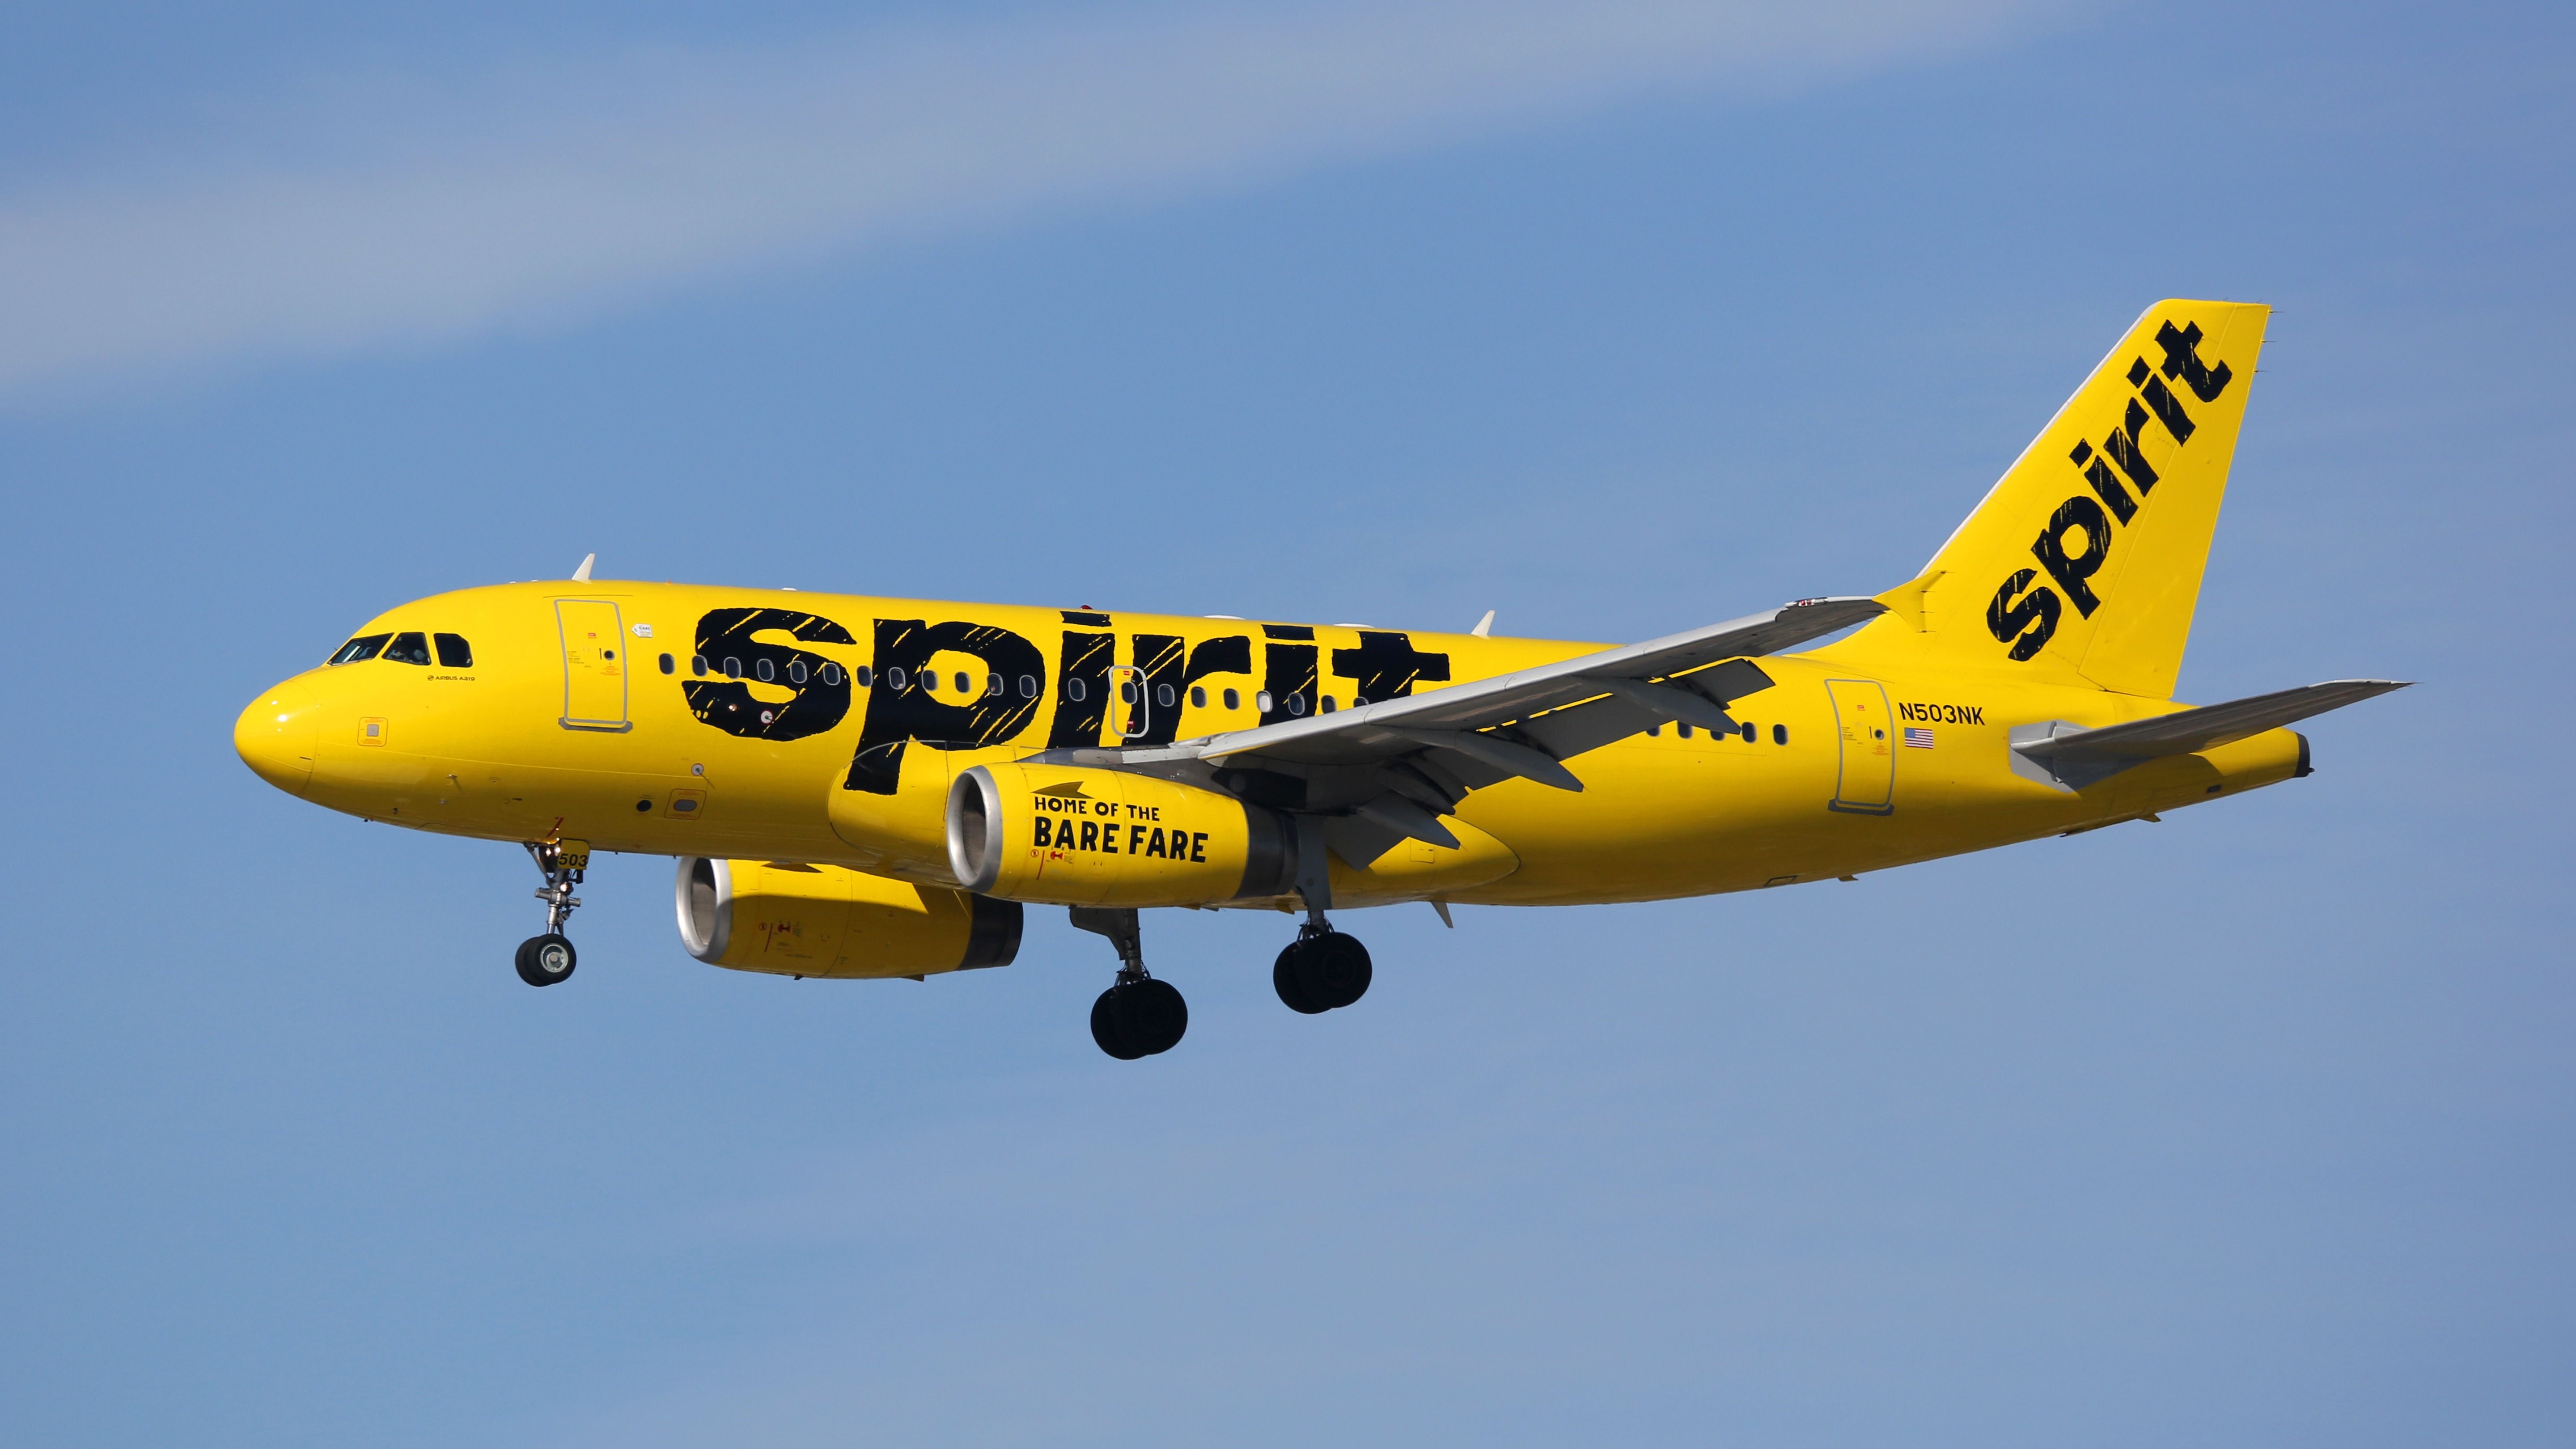 A Spirit Airlines Airbus A319 landing